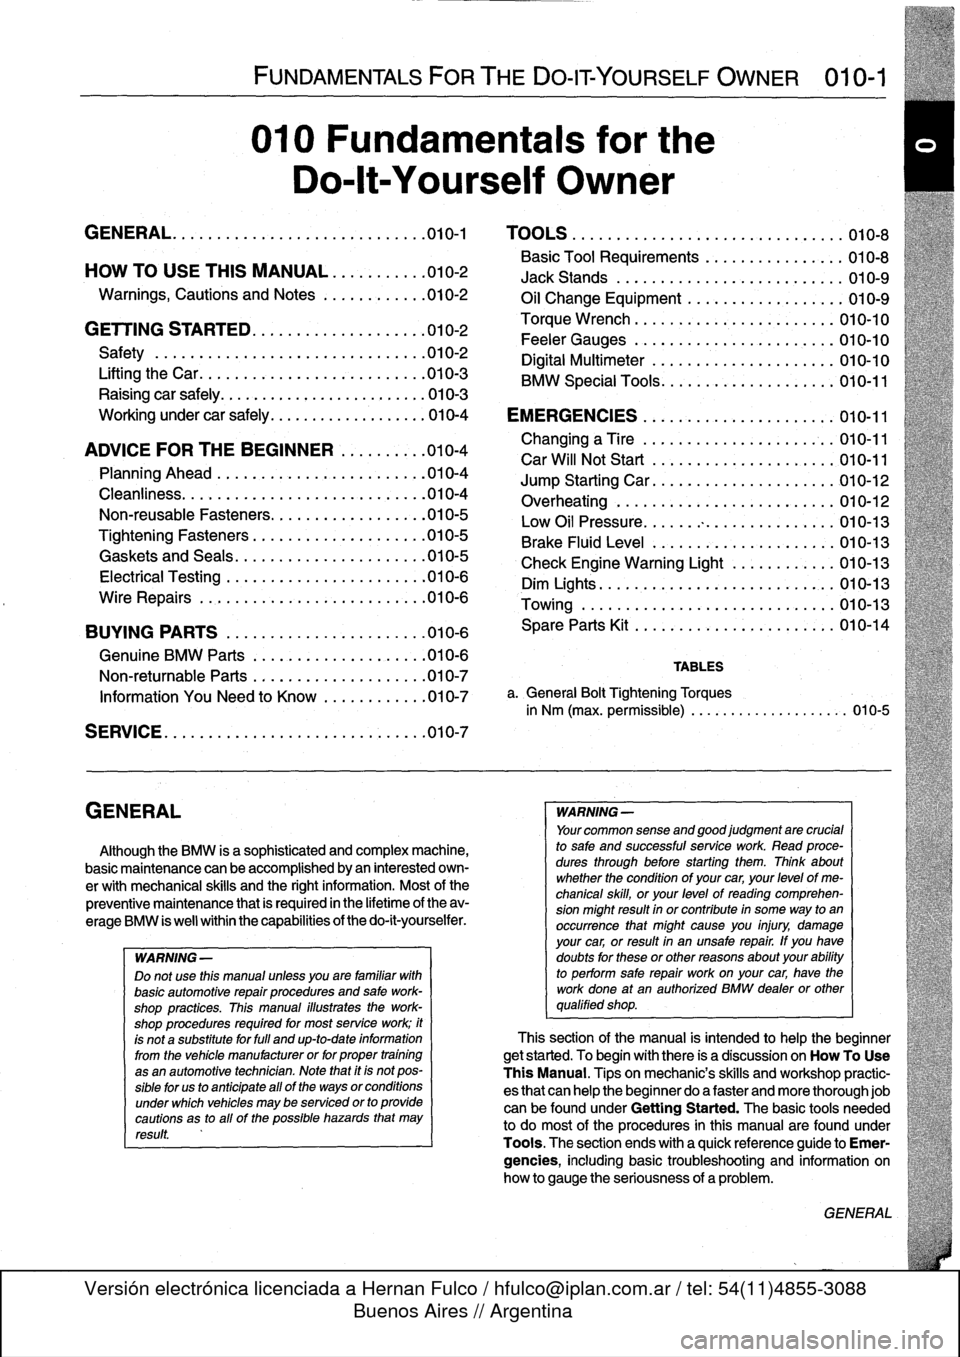 BMW 323i 1993 E36 Workshop Manual 
GENERAL

FUNDAMENTALS
FORTHE
DO-IT
YOURSELF
OWNER

	

010-1

010
Fundamentals
for
the

Do-lt-Yourself
Owner

GENERAL
.......
.
.
.
......
.
.........
.
.
.010-1

	

TOOLS
.
.
...
.
............
.
...